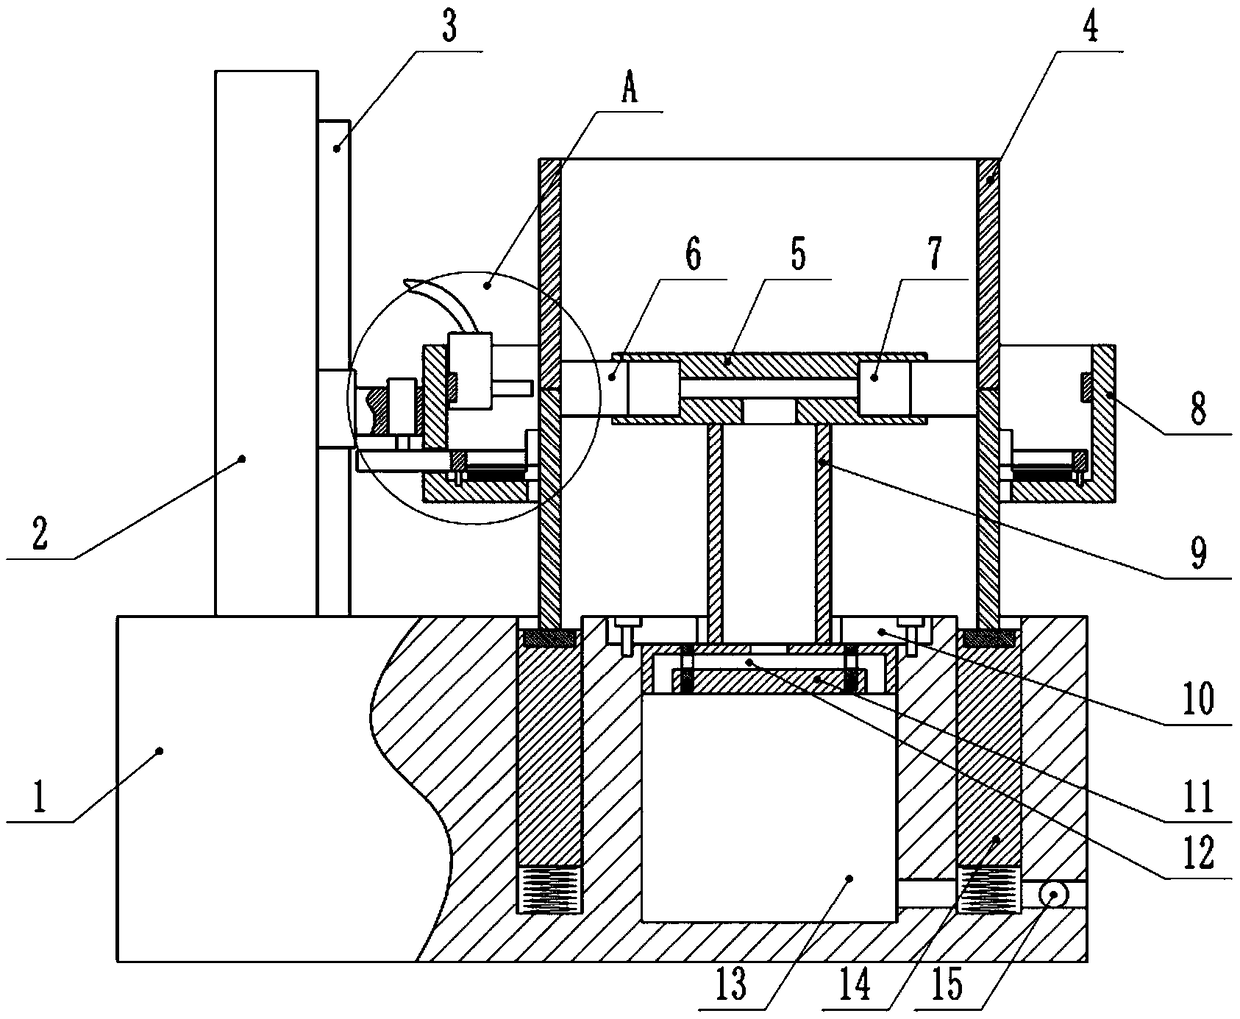 Welding device for incinerator manufacturing